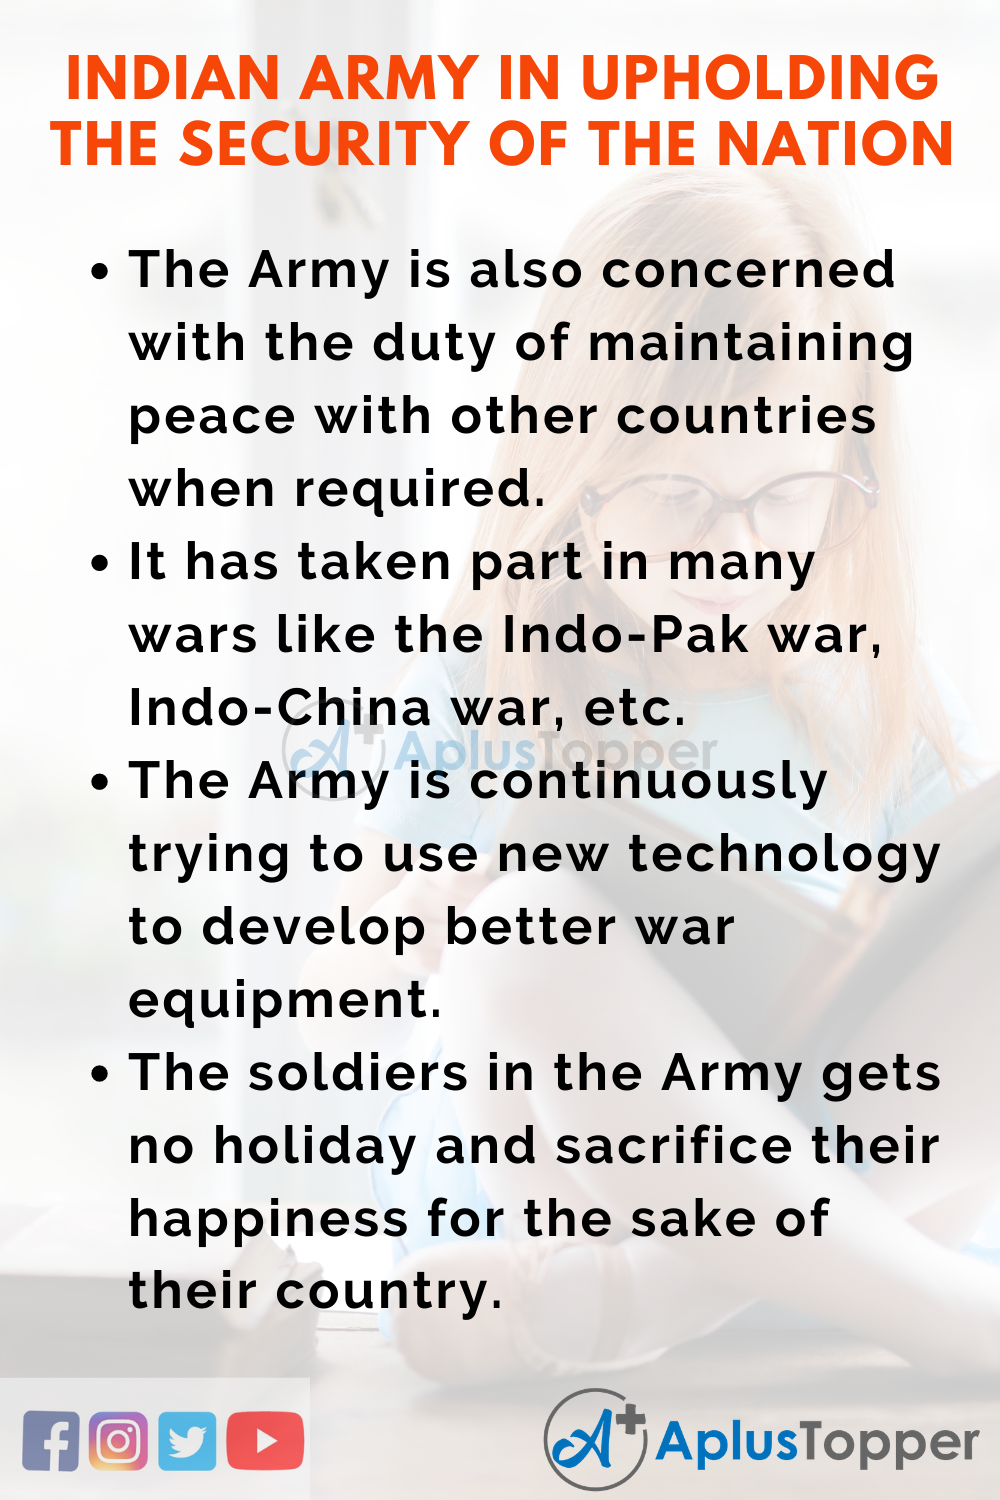 Short Speech On Indian Army In Upholding The Security Of The Nation 150 Words In English